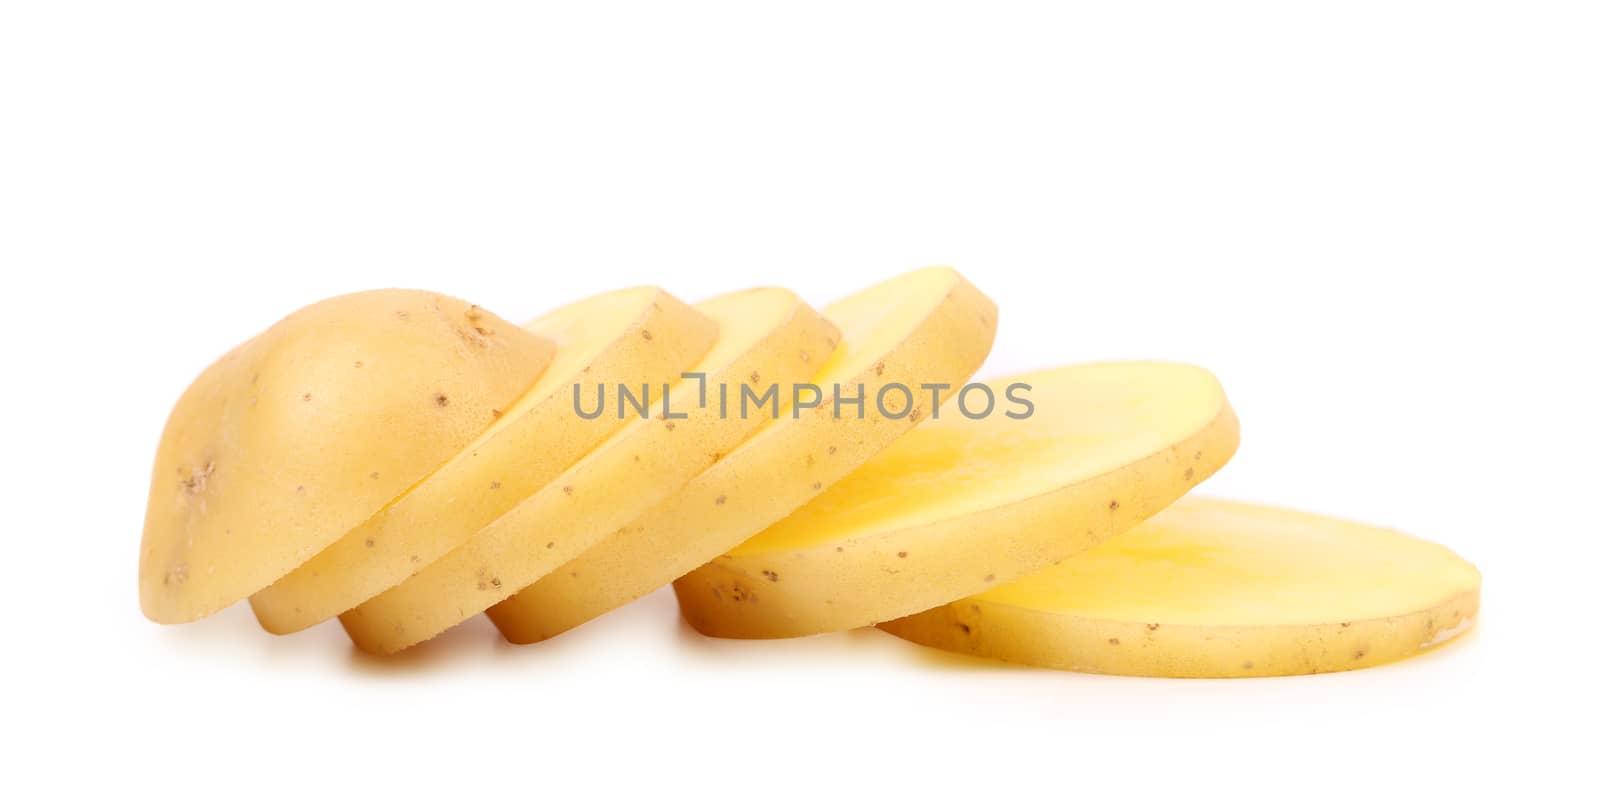 Sliced yellow potatoes isolated on a white background